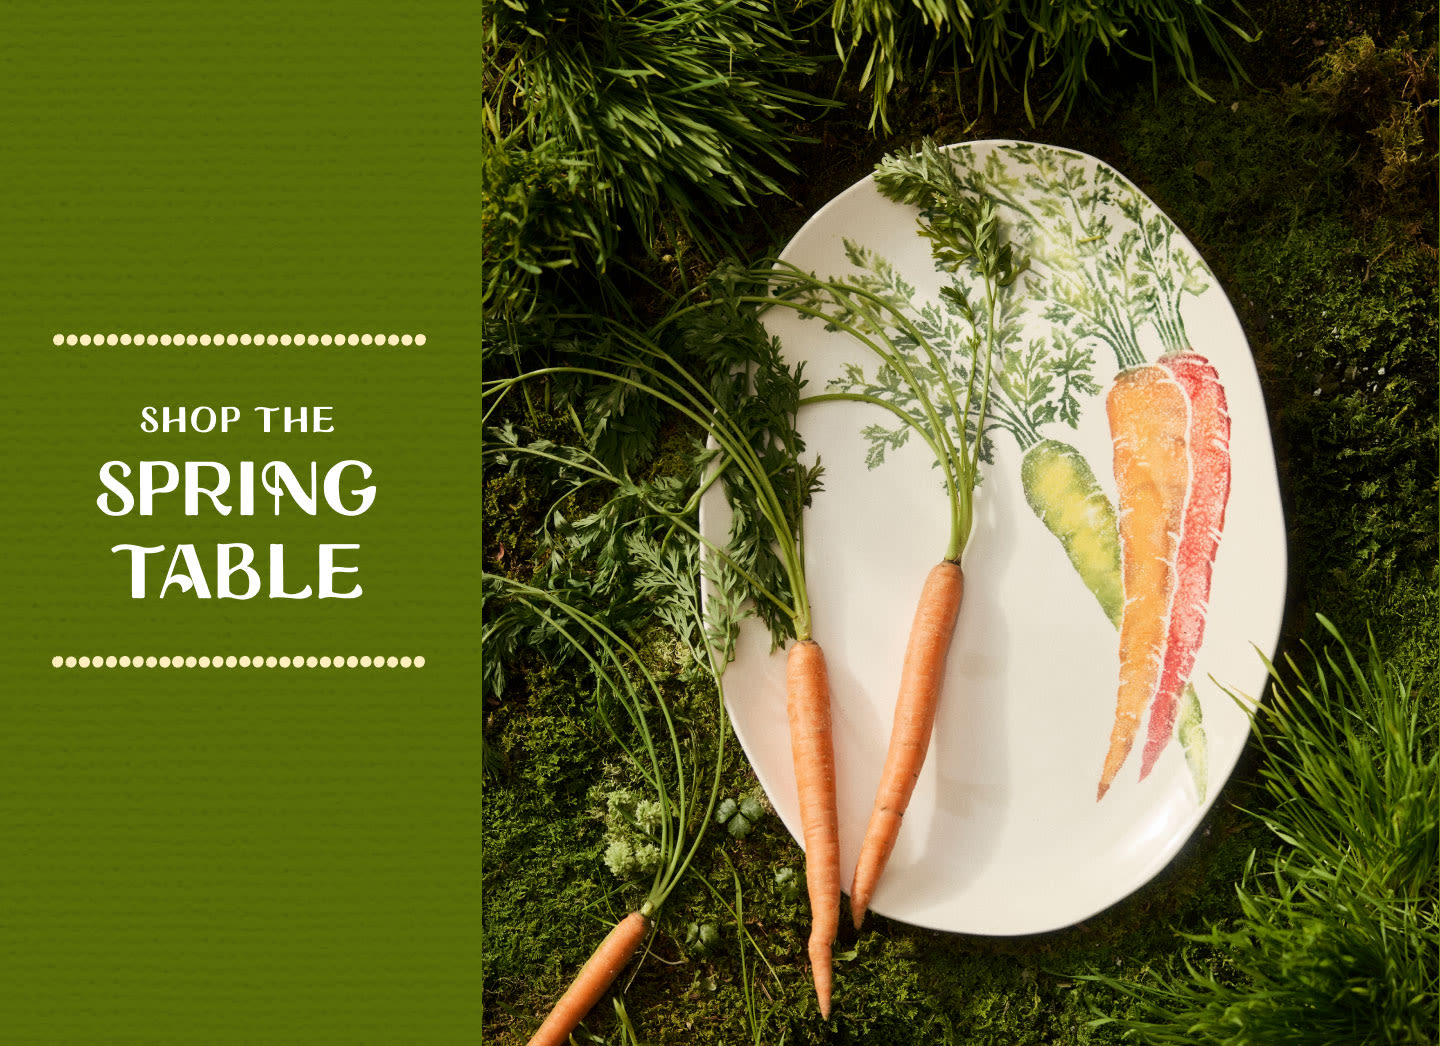 Set the Spring Tabletop